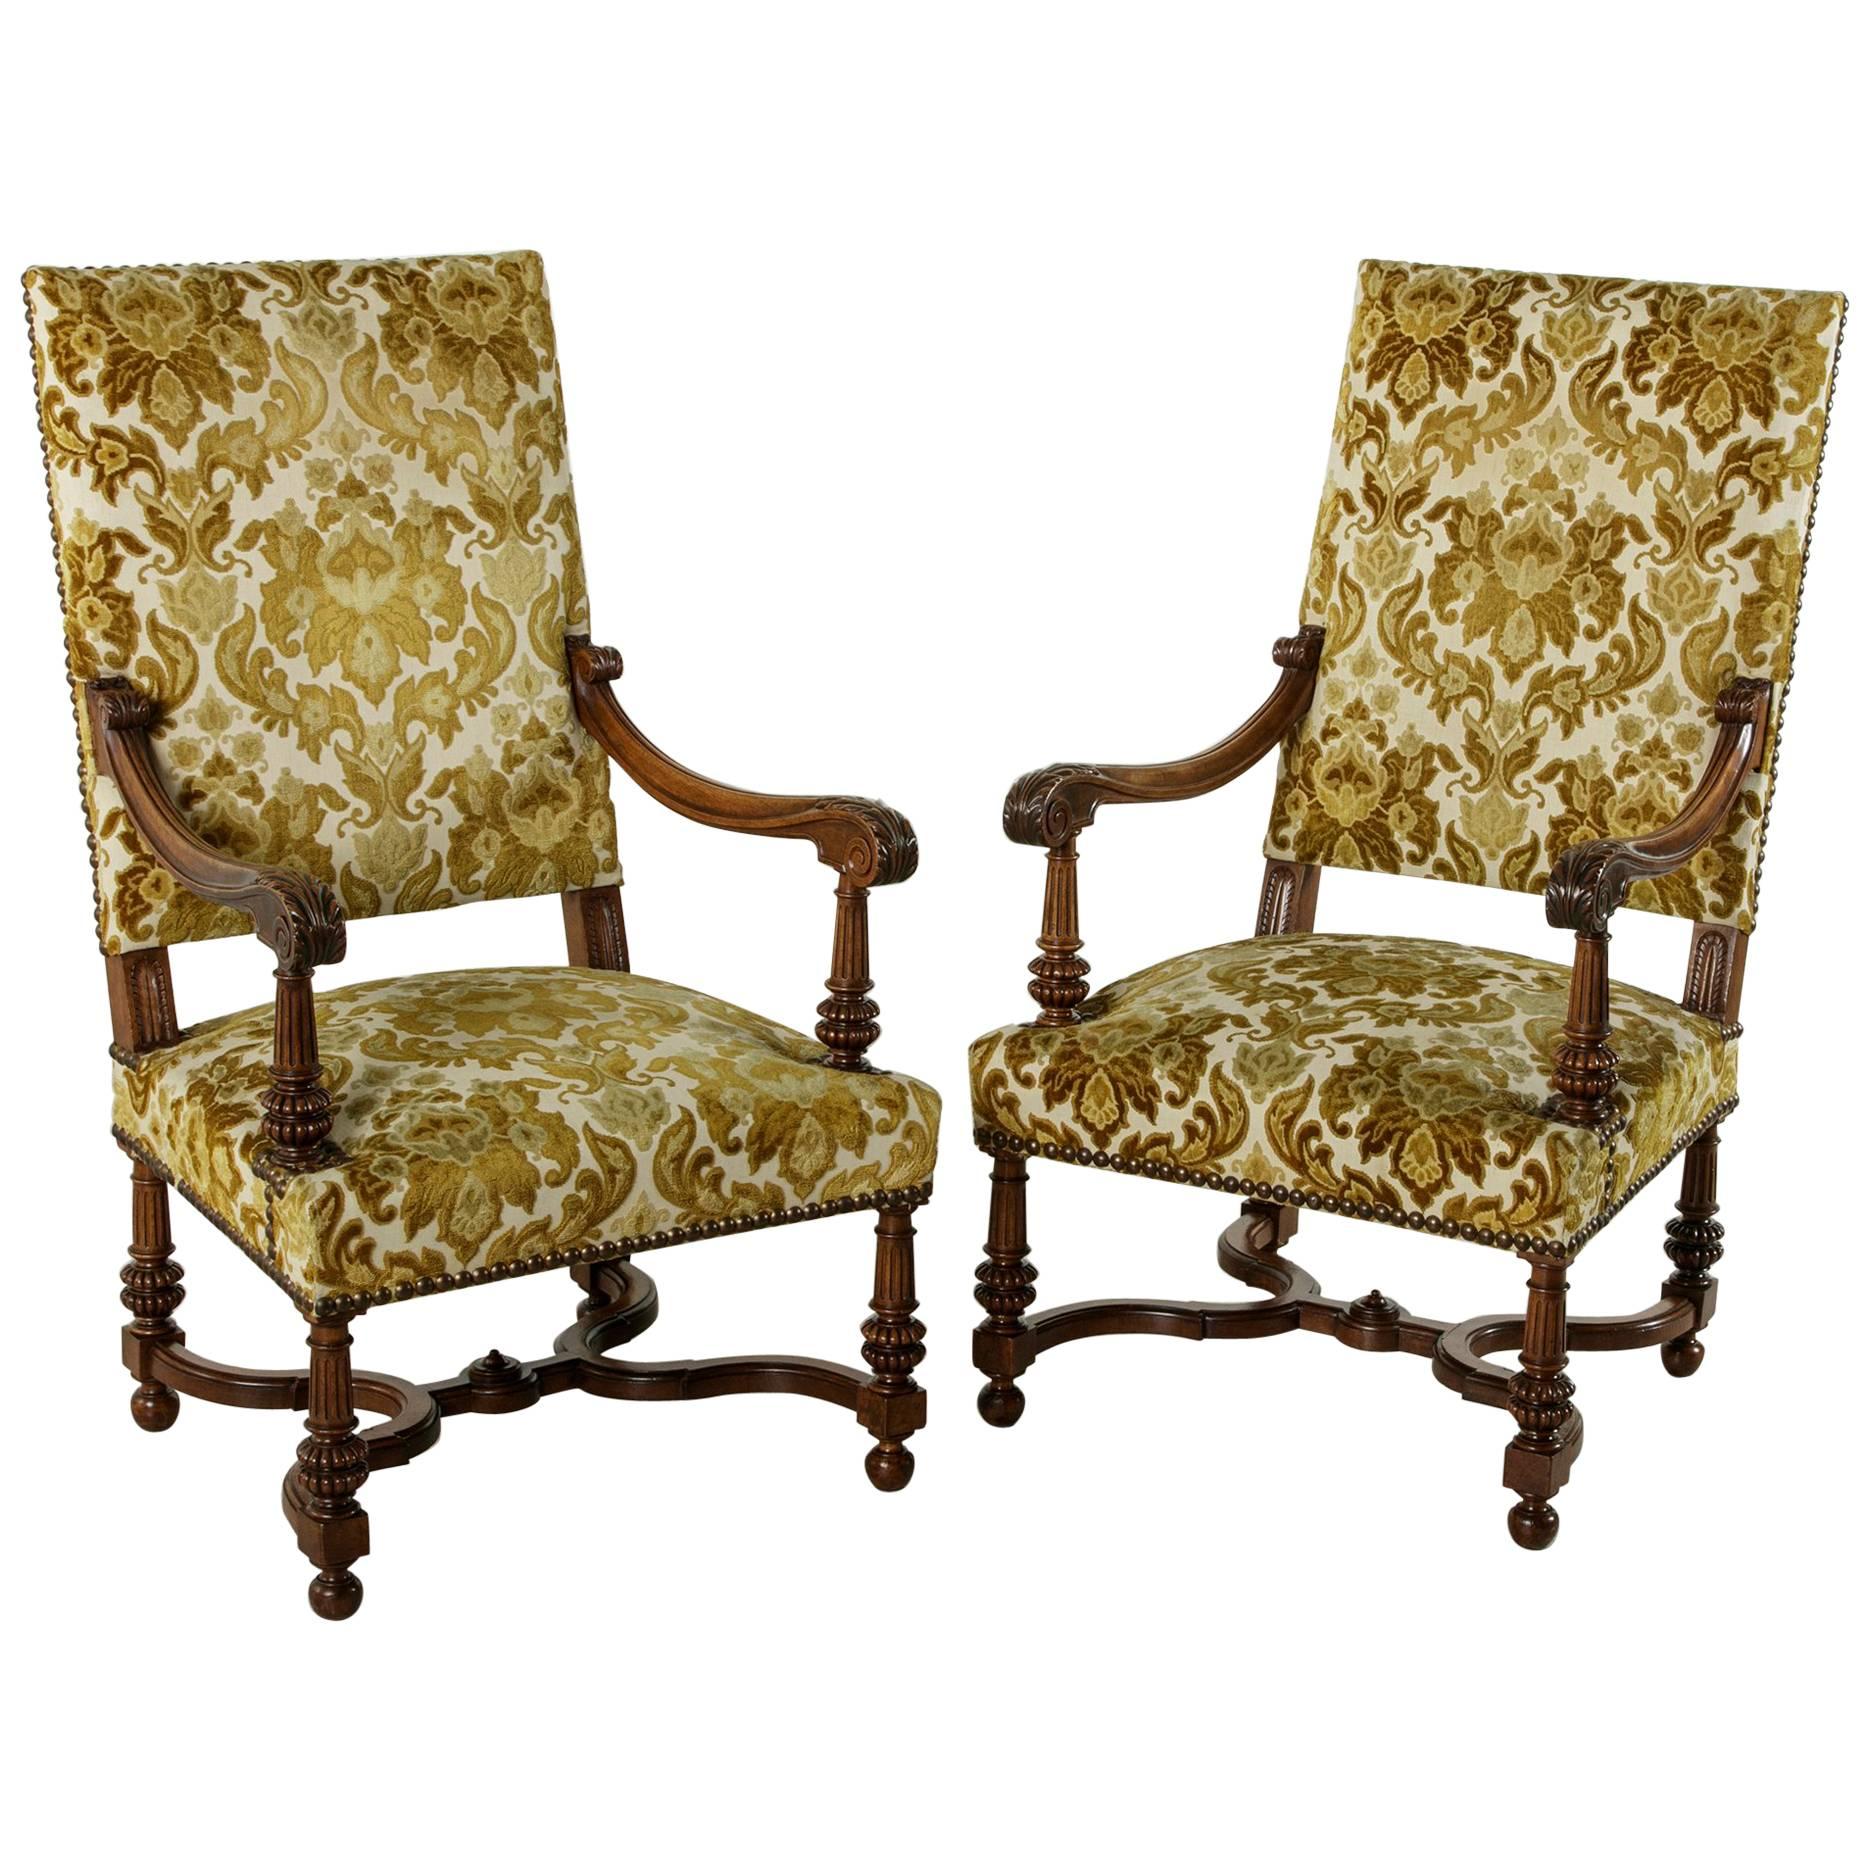 Pair of Late 19th Century French Hand-Carved Walnut Louis XIV Style Armchairs